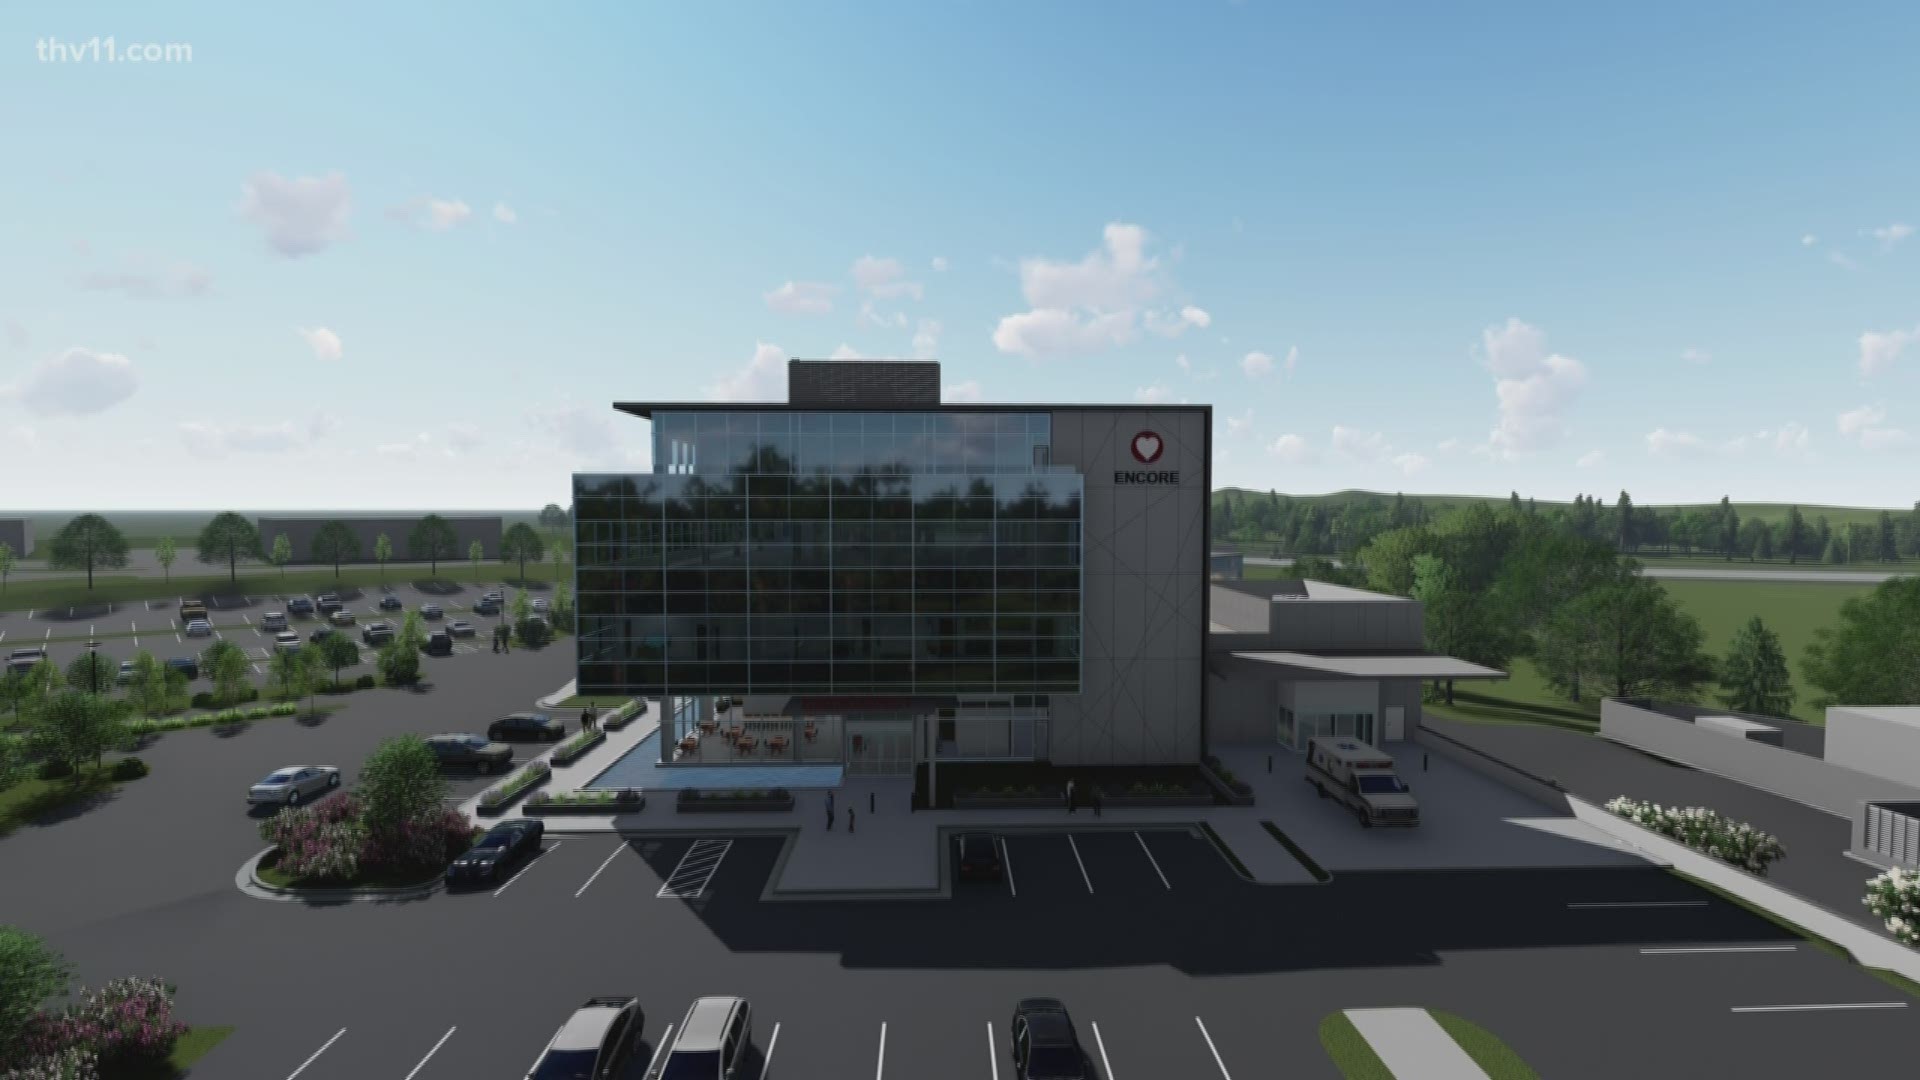 The Arkansas Heart Hospital is giving patients who need it a second chance.